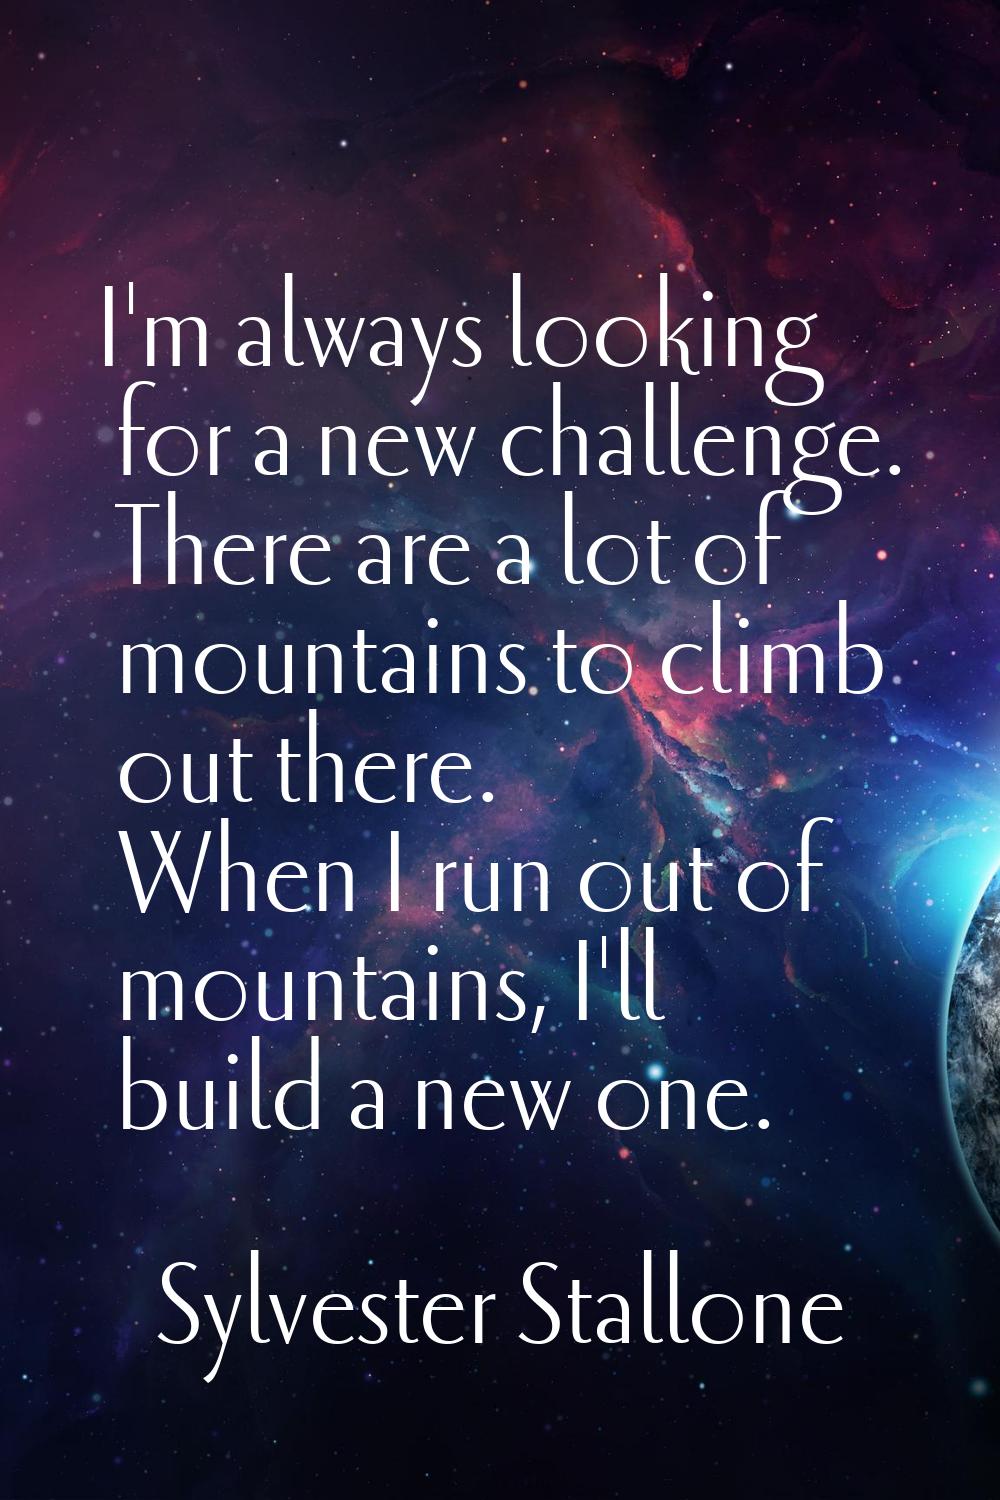 I'm always looking for a new challenge. There are a lot of mountains to climb out there. When I run